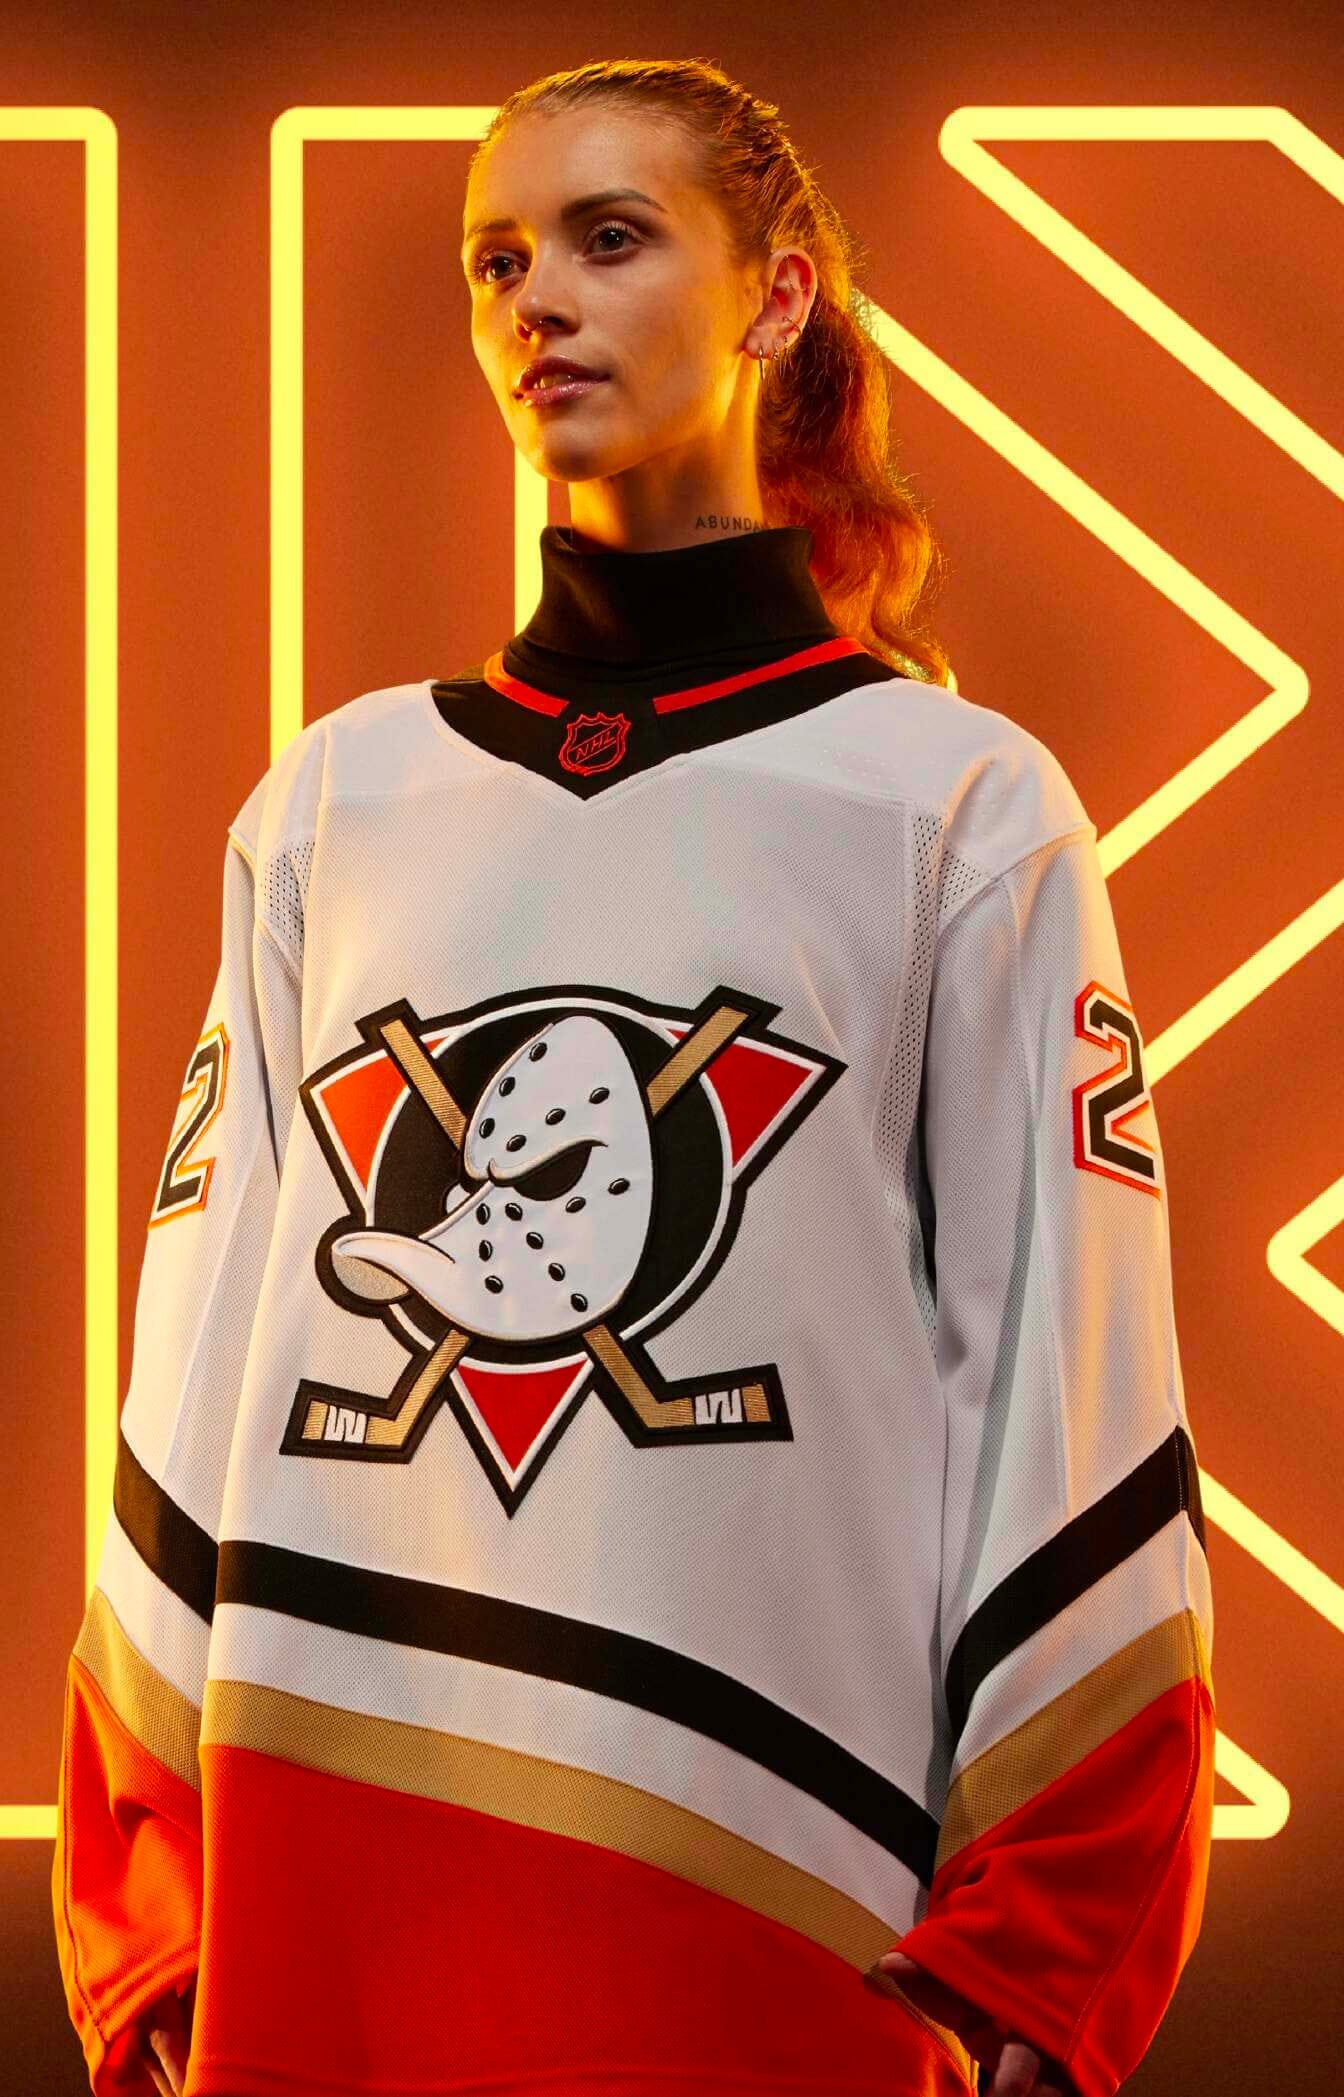 Uni Watch Power Rankings for the NHL's New Reverse Retro Uniforms